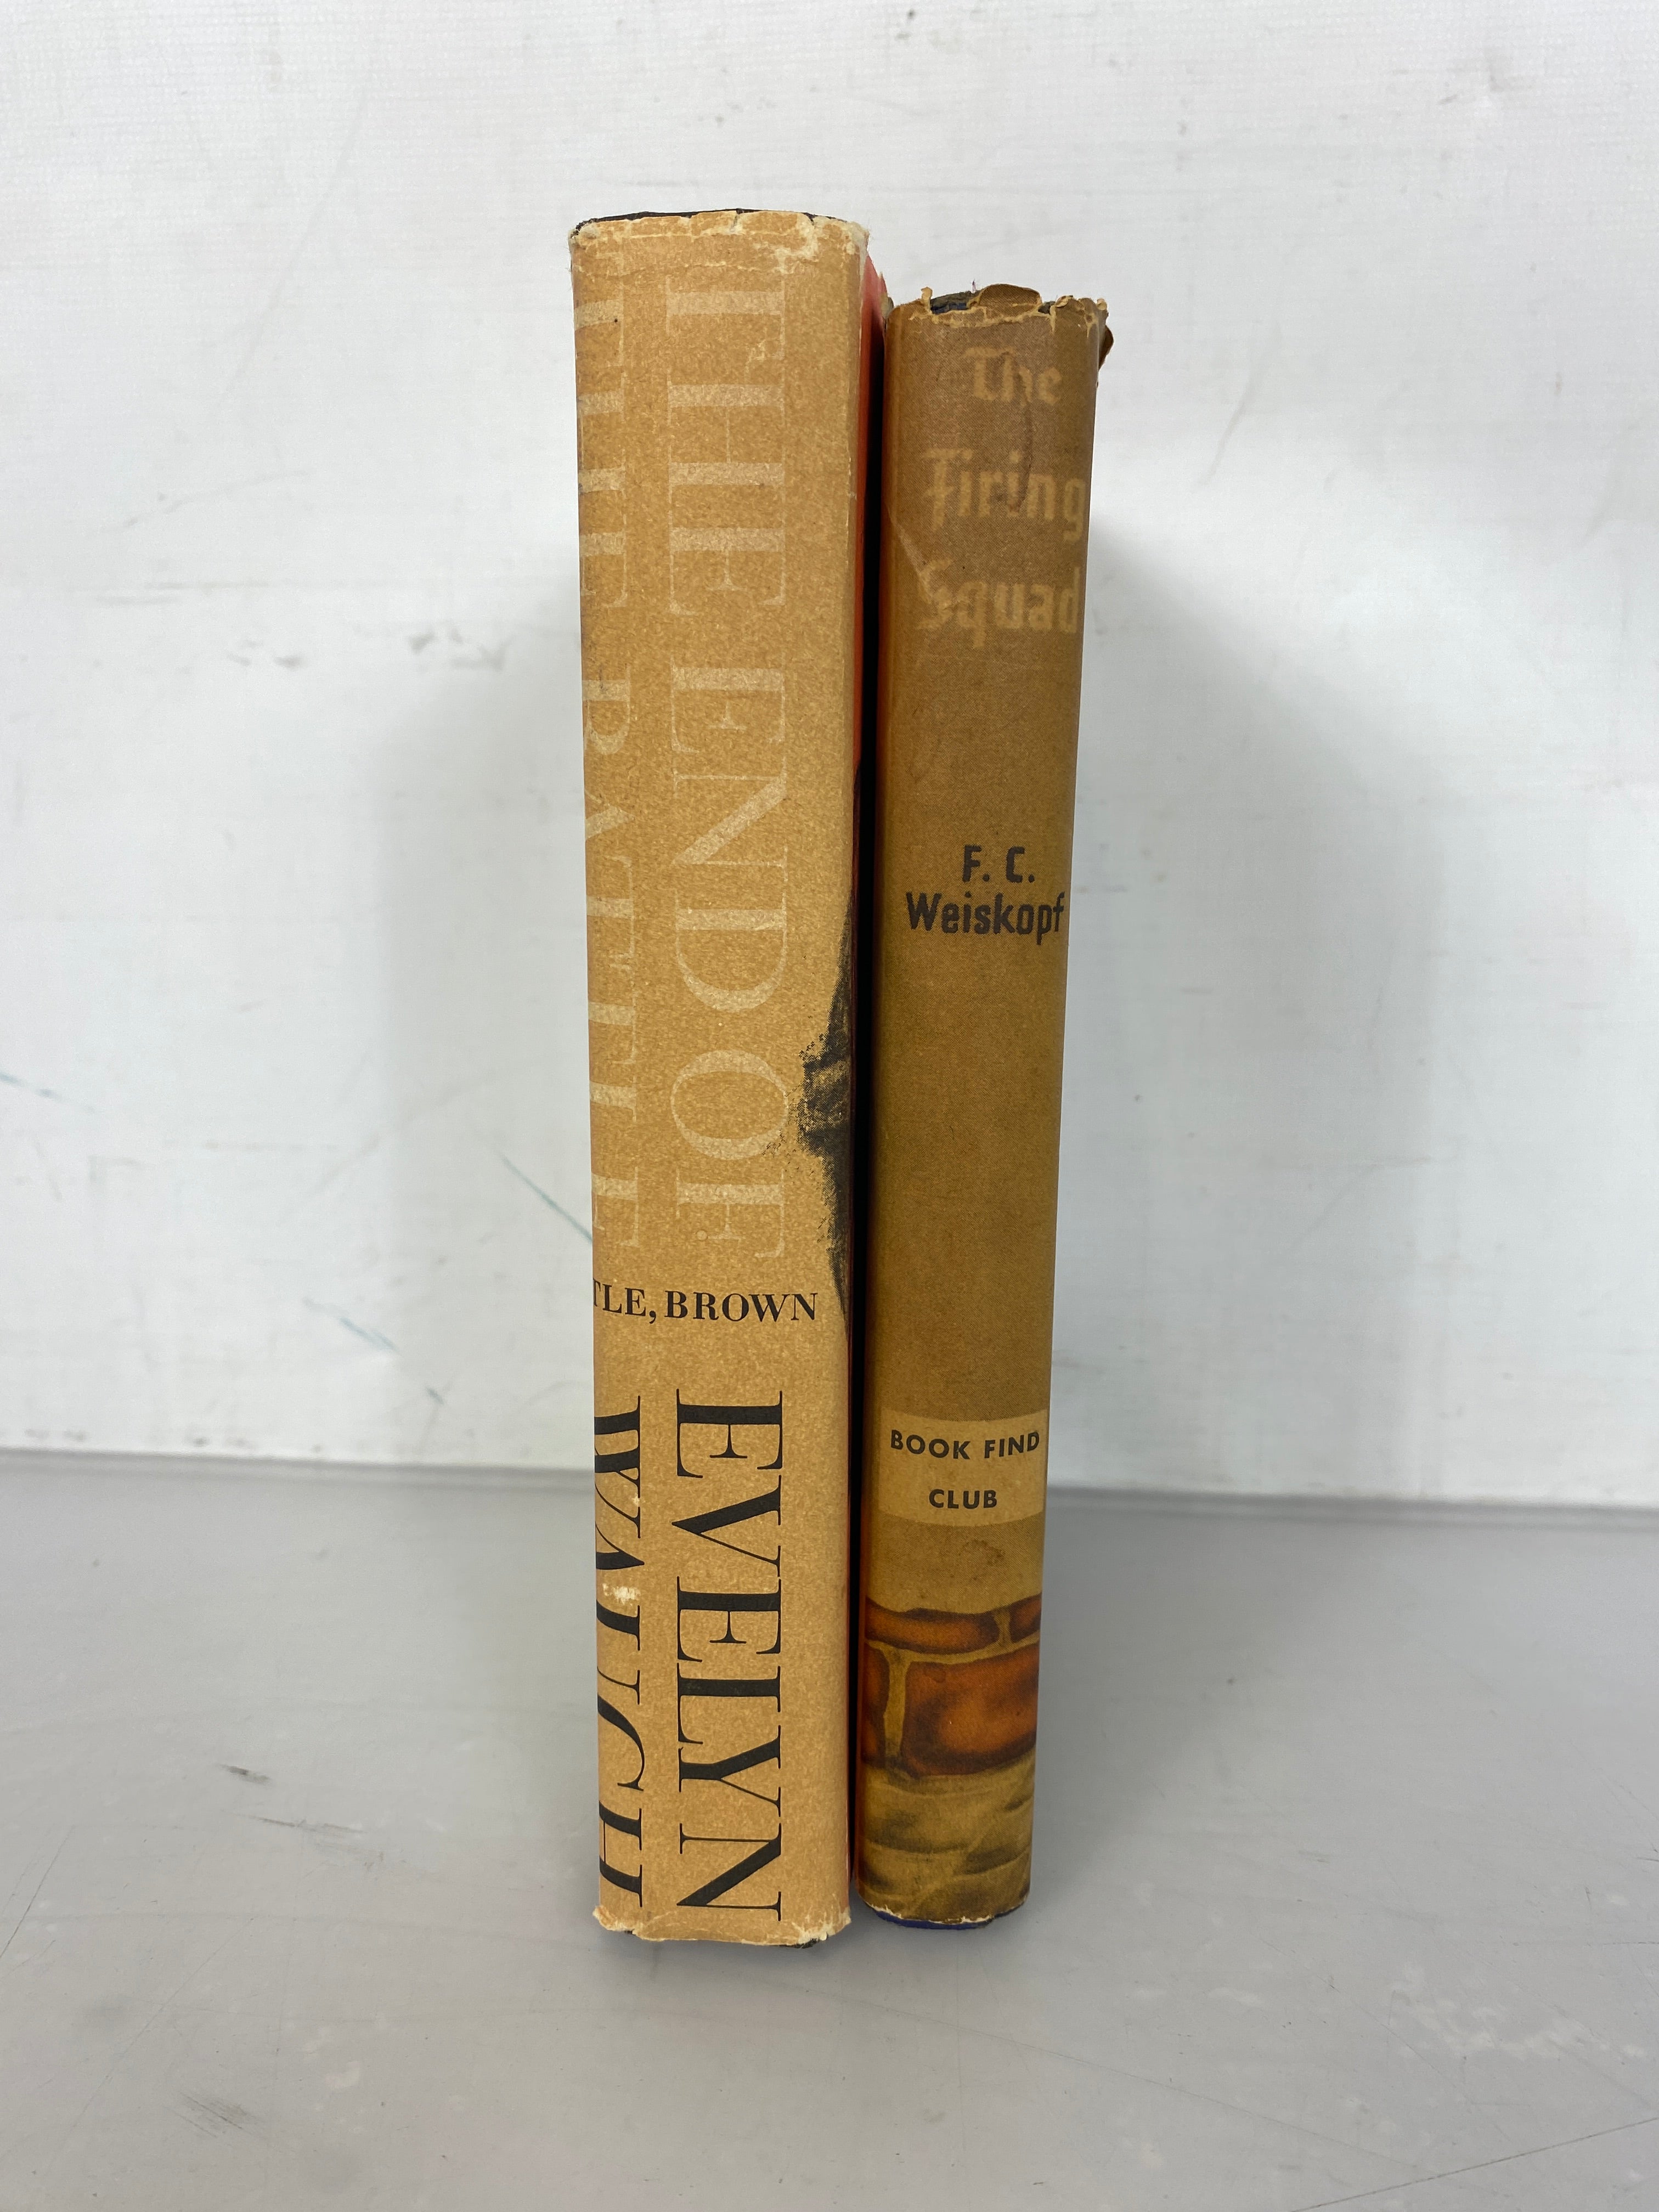 Lot of 2 WWII Novels: The End of the Battle by Waugh (1961) and The Firing Squad by Weiskopf (1944) HC DJ (Copy)